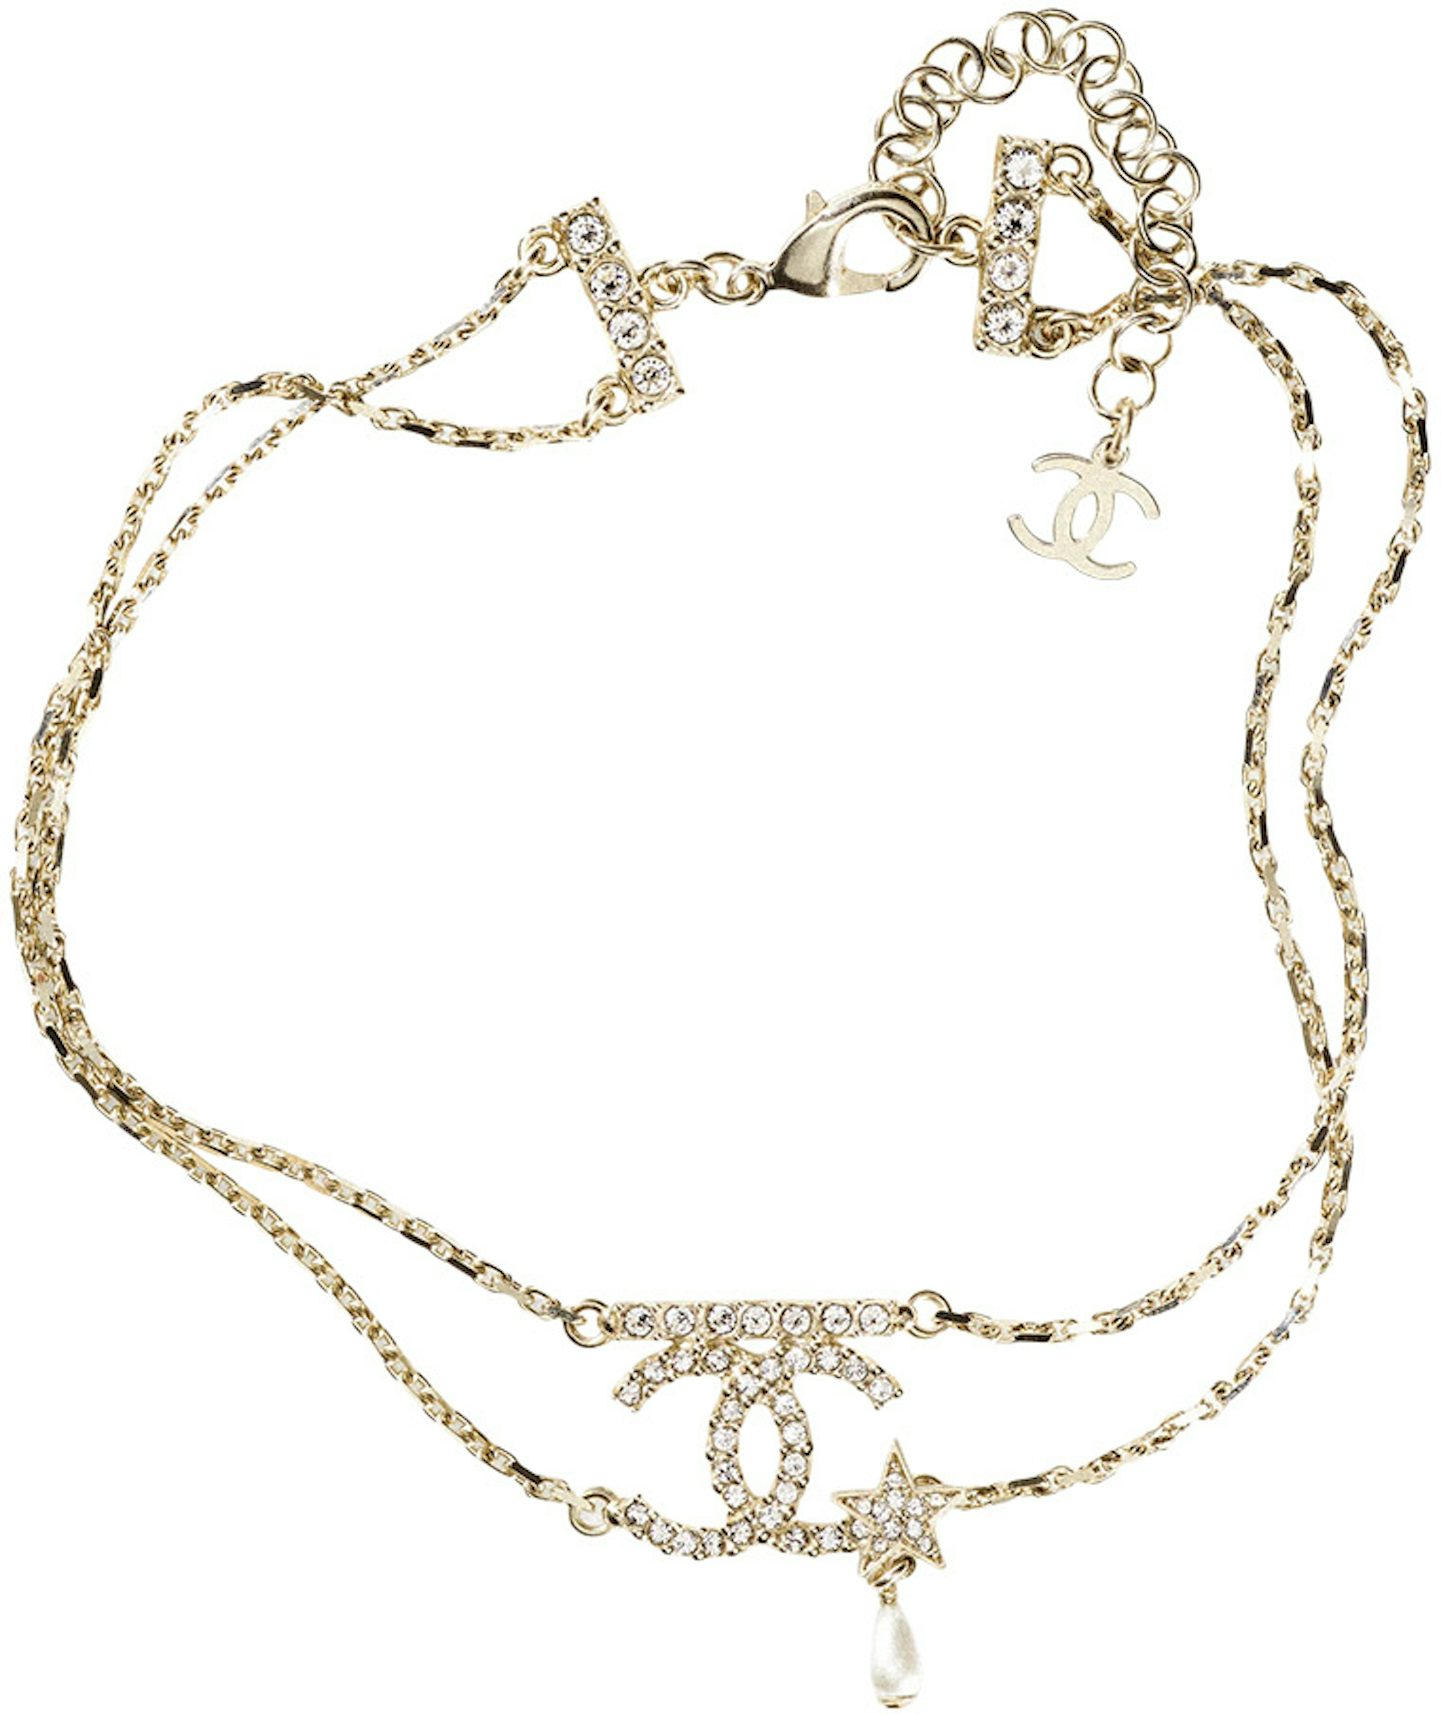 Chanel Metal Choker Necklace Gold/White in Gold Metal - US